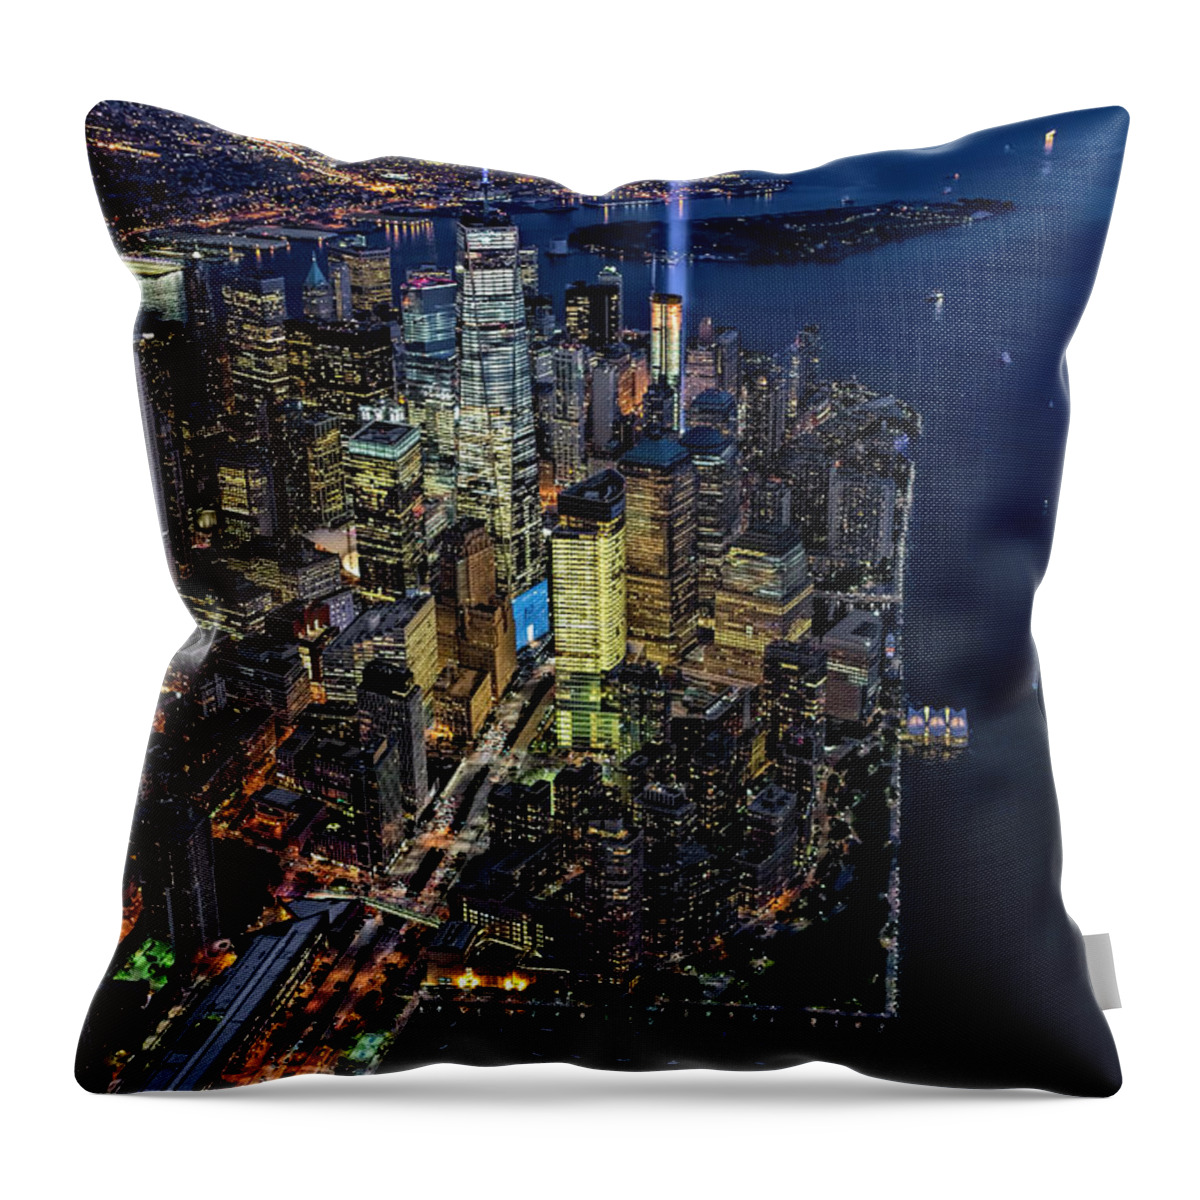 911 Memorial Throw Pillow featuring the photograph New York City Remembers 9-11 by Susan Candelario